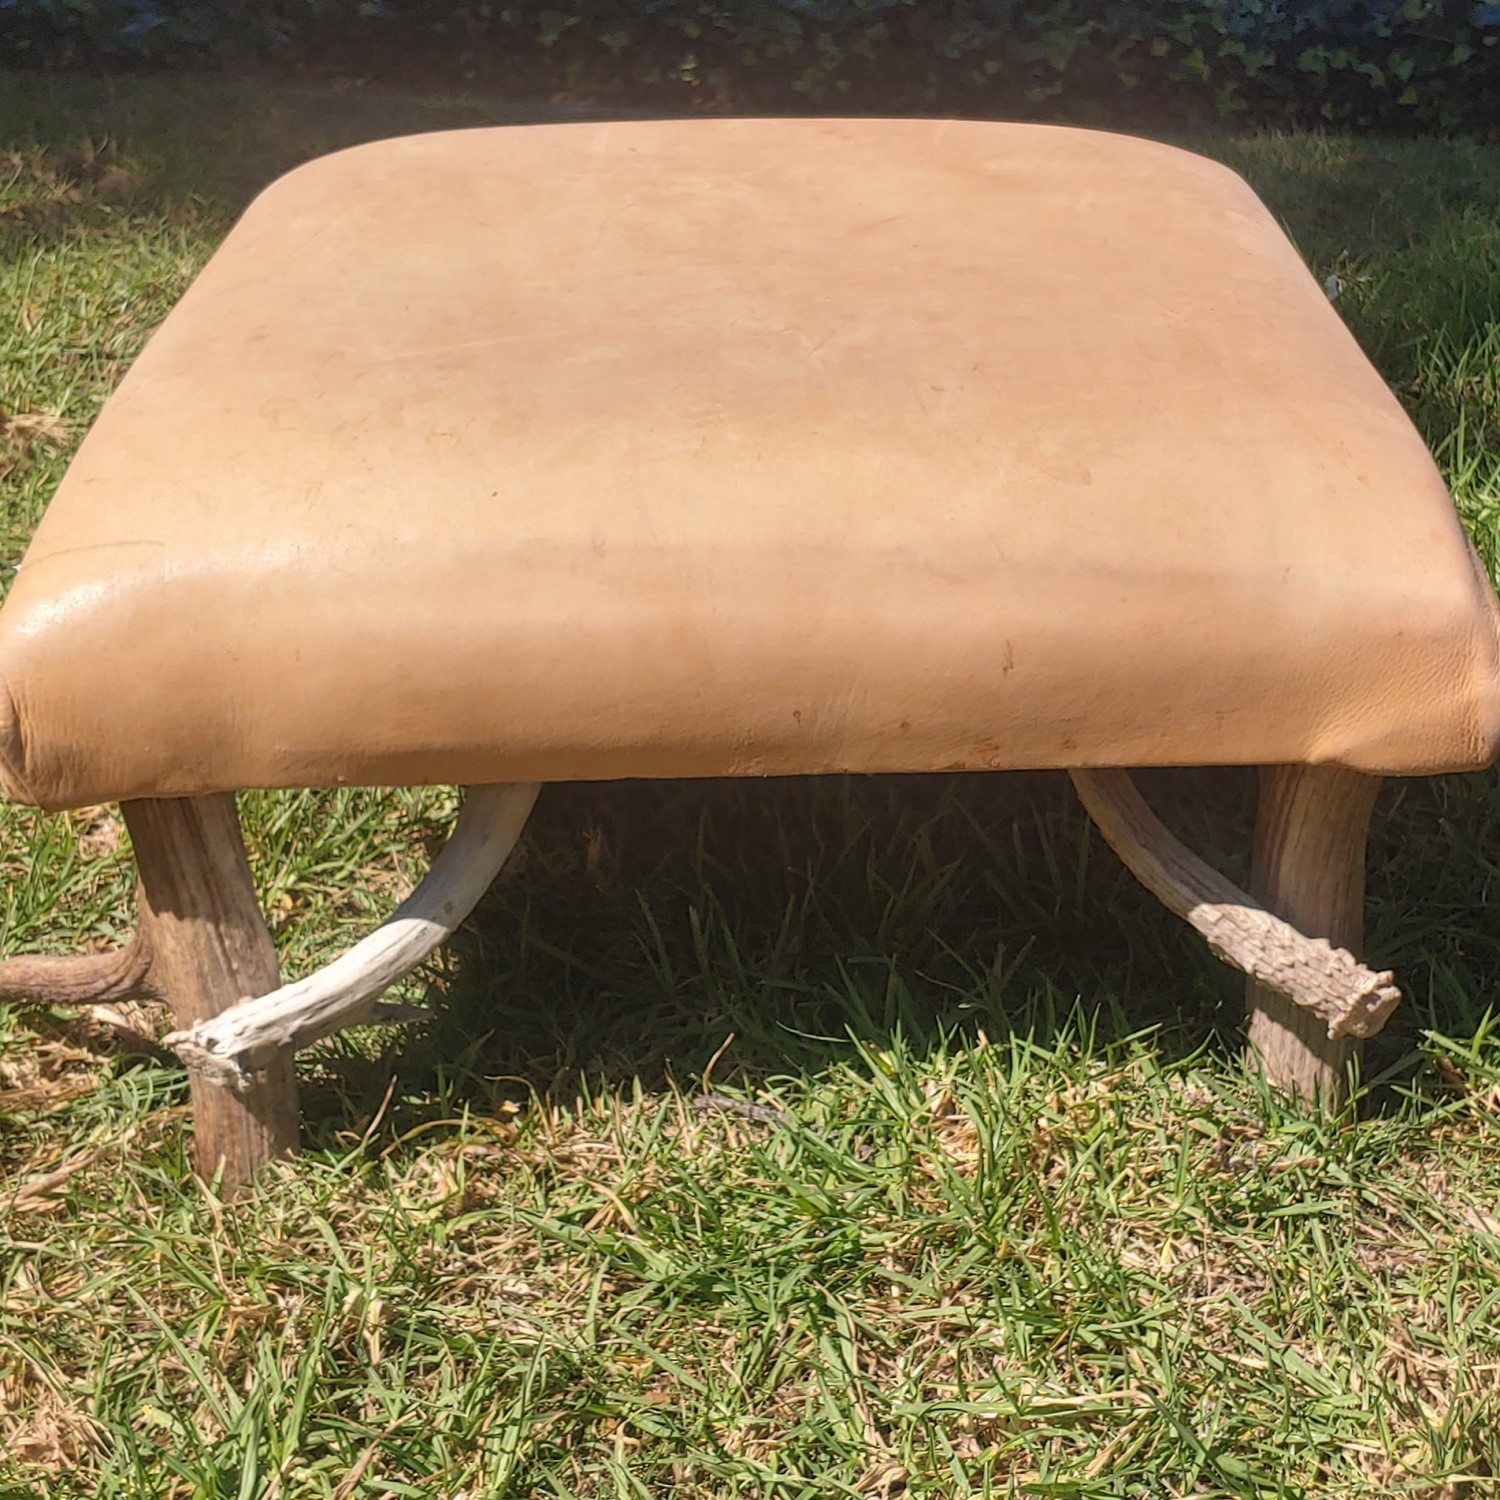 Real genuine Deer antler/leather Foot stool/ottoman/chair 2’ wide 1’ tall 